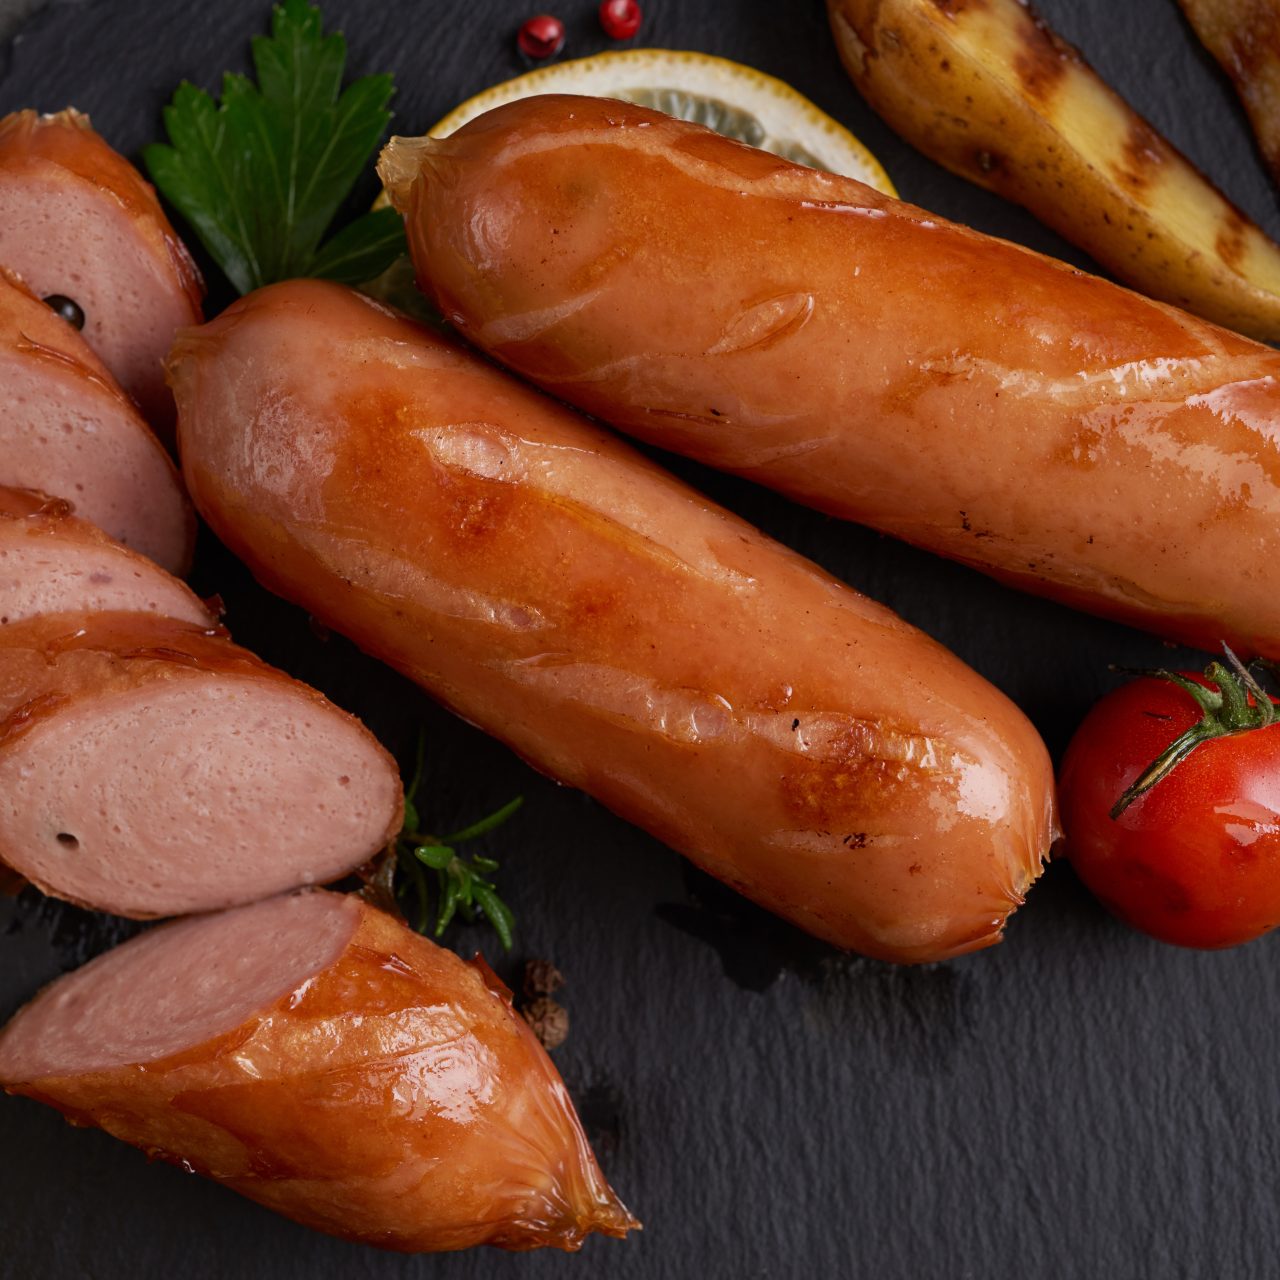 Sausages,And,Ingredients,For,Cooking.,Grilled,Sausage,With,The,Addition